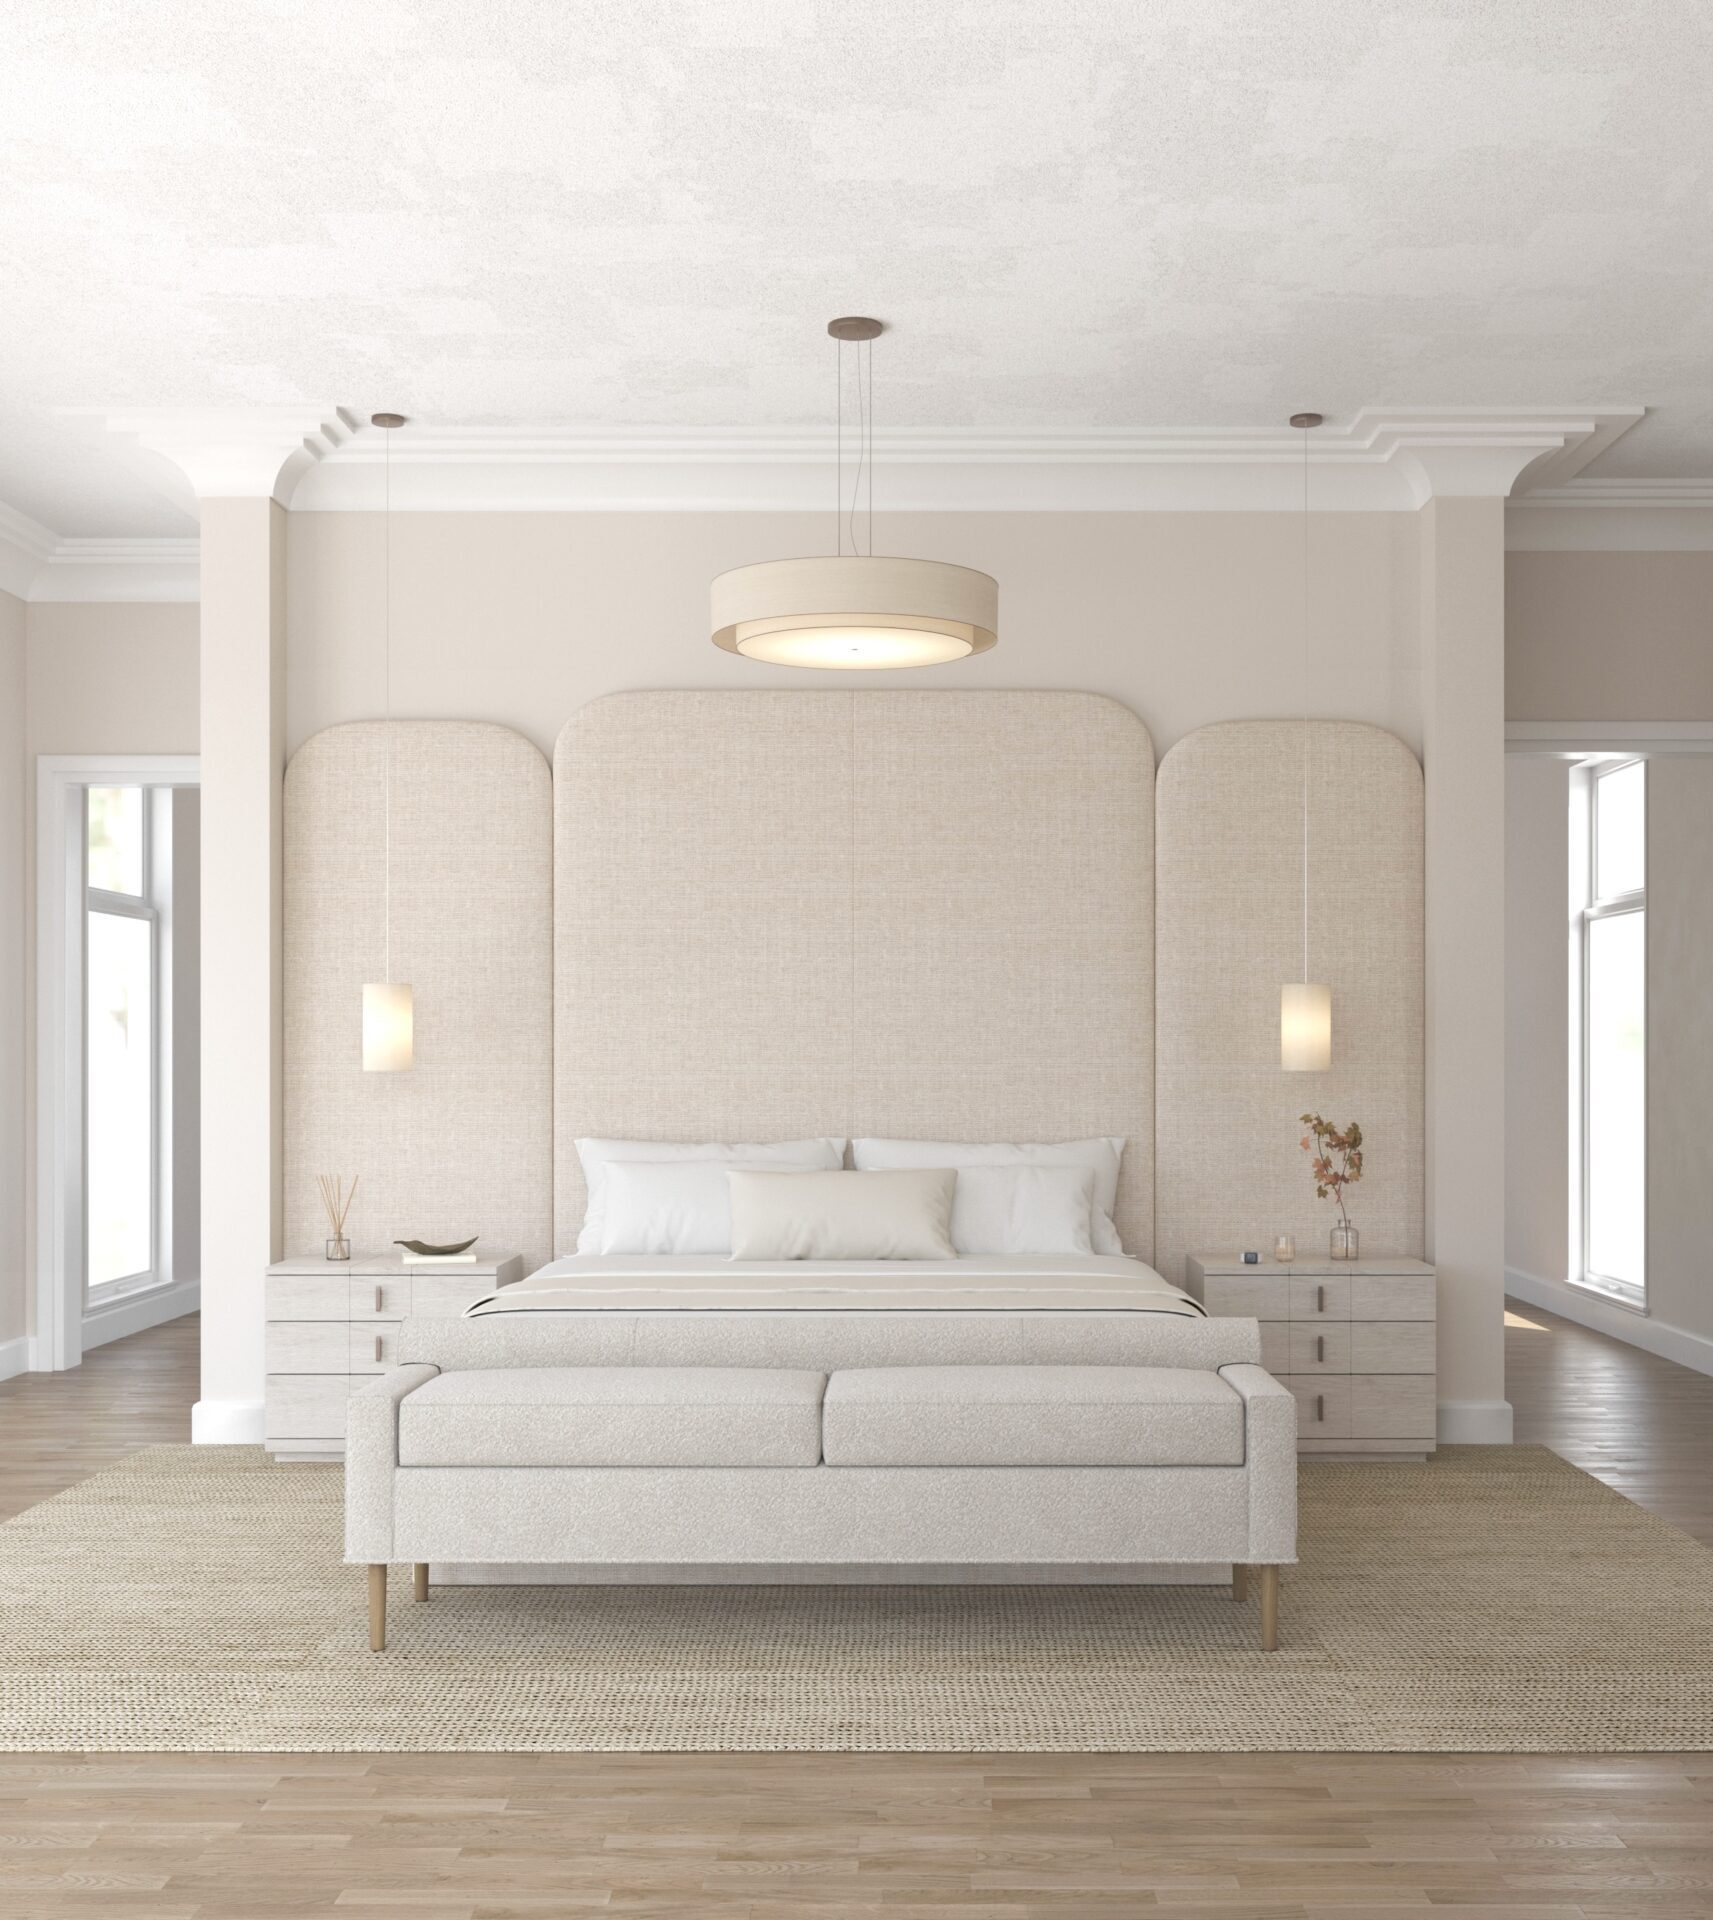 ENGLISH-wall-mounted-upholstered-headboard-bed-luxury-furniture-blend-home-furnishings